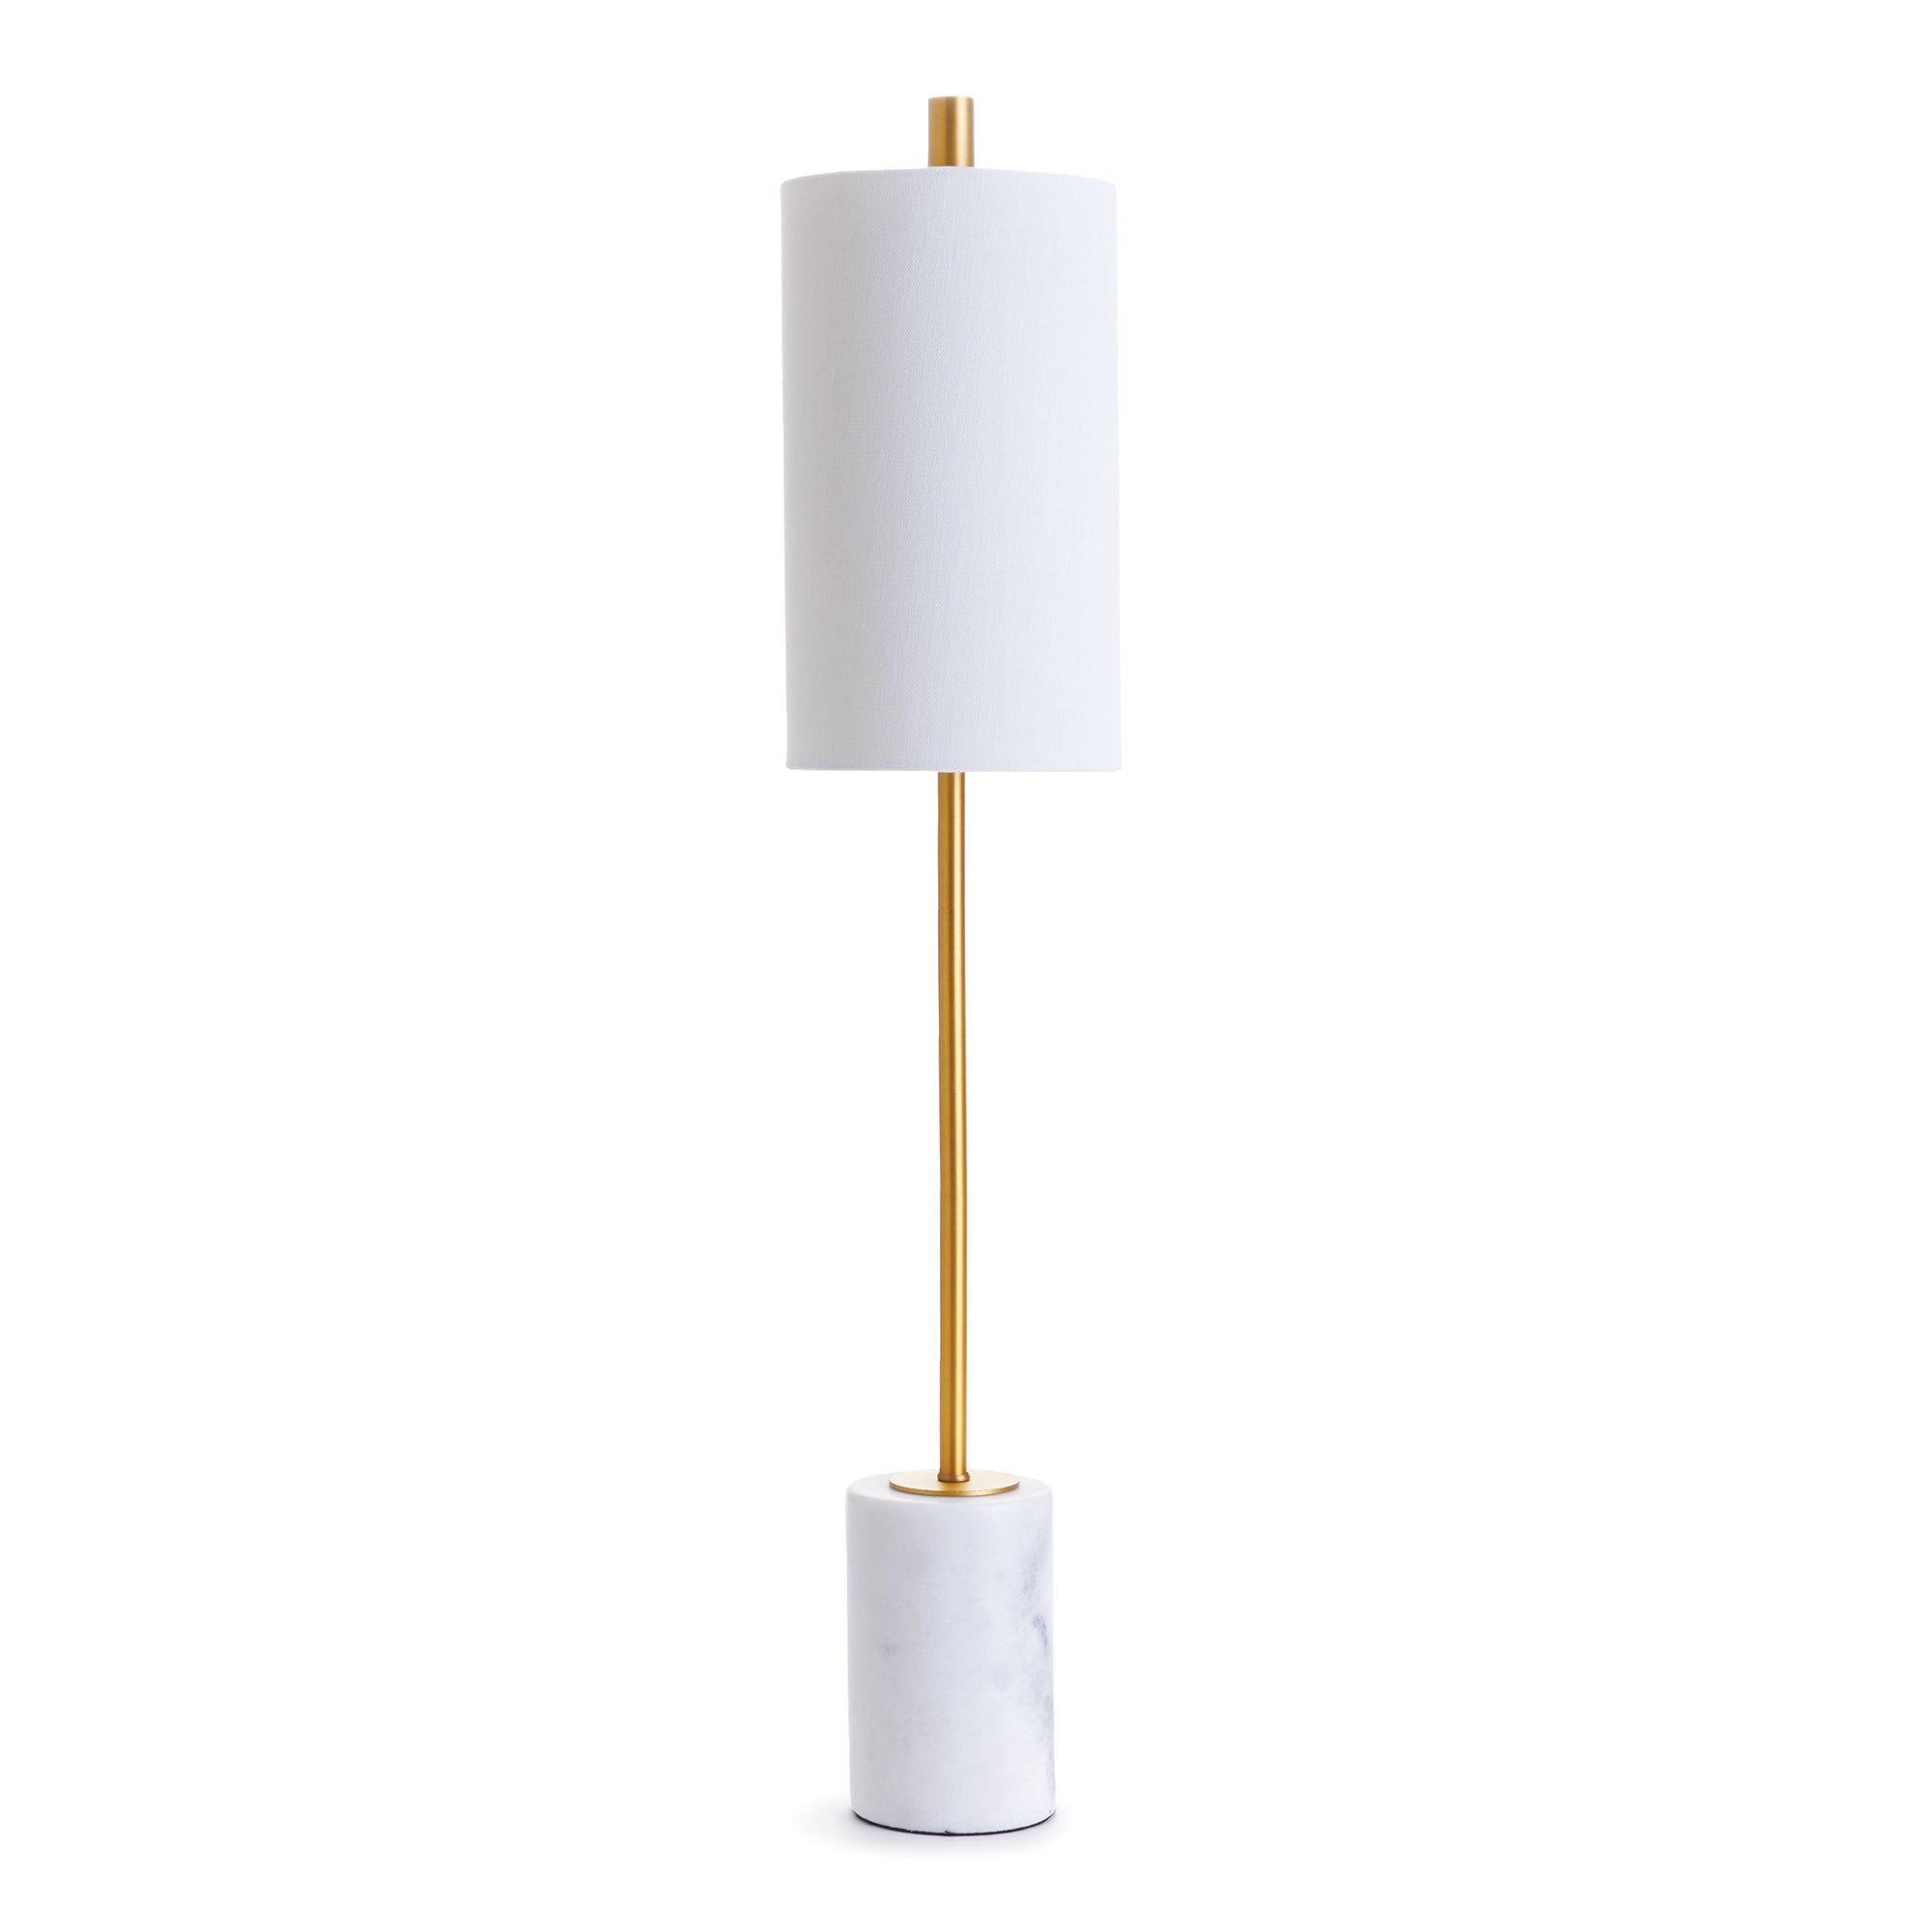 An unexpected mix of marble and brass accents make this lamp a stand out piece. The tall, narrow base and tailored shade are well-designed details not to be missed. Amethyst Home provides interior design, new construction, custom furniture, and area rugs in the San Diego metro area.